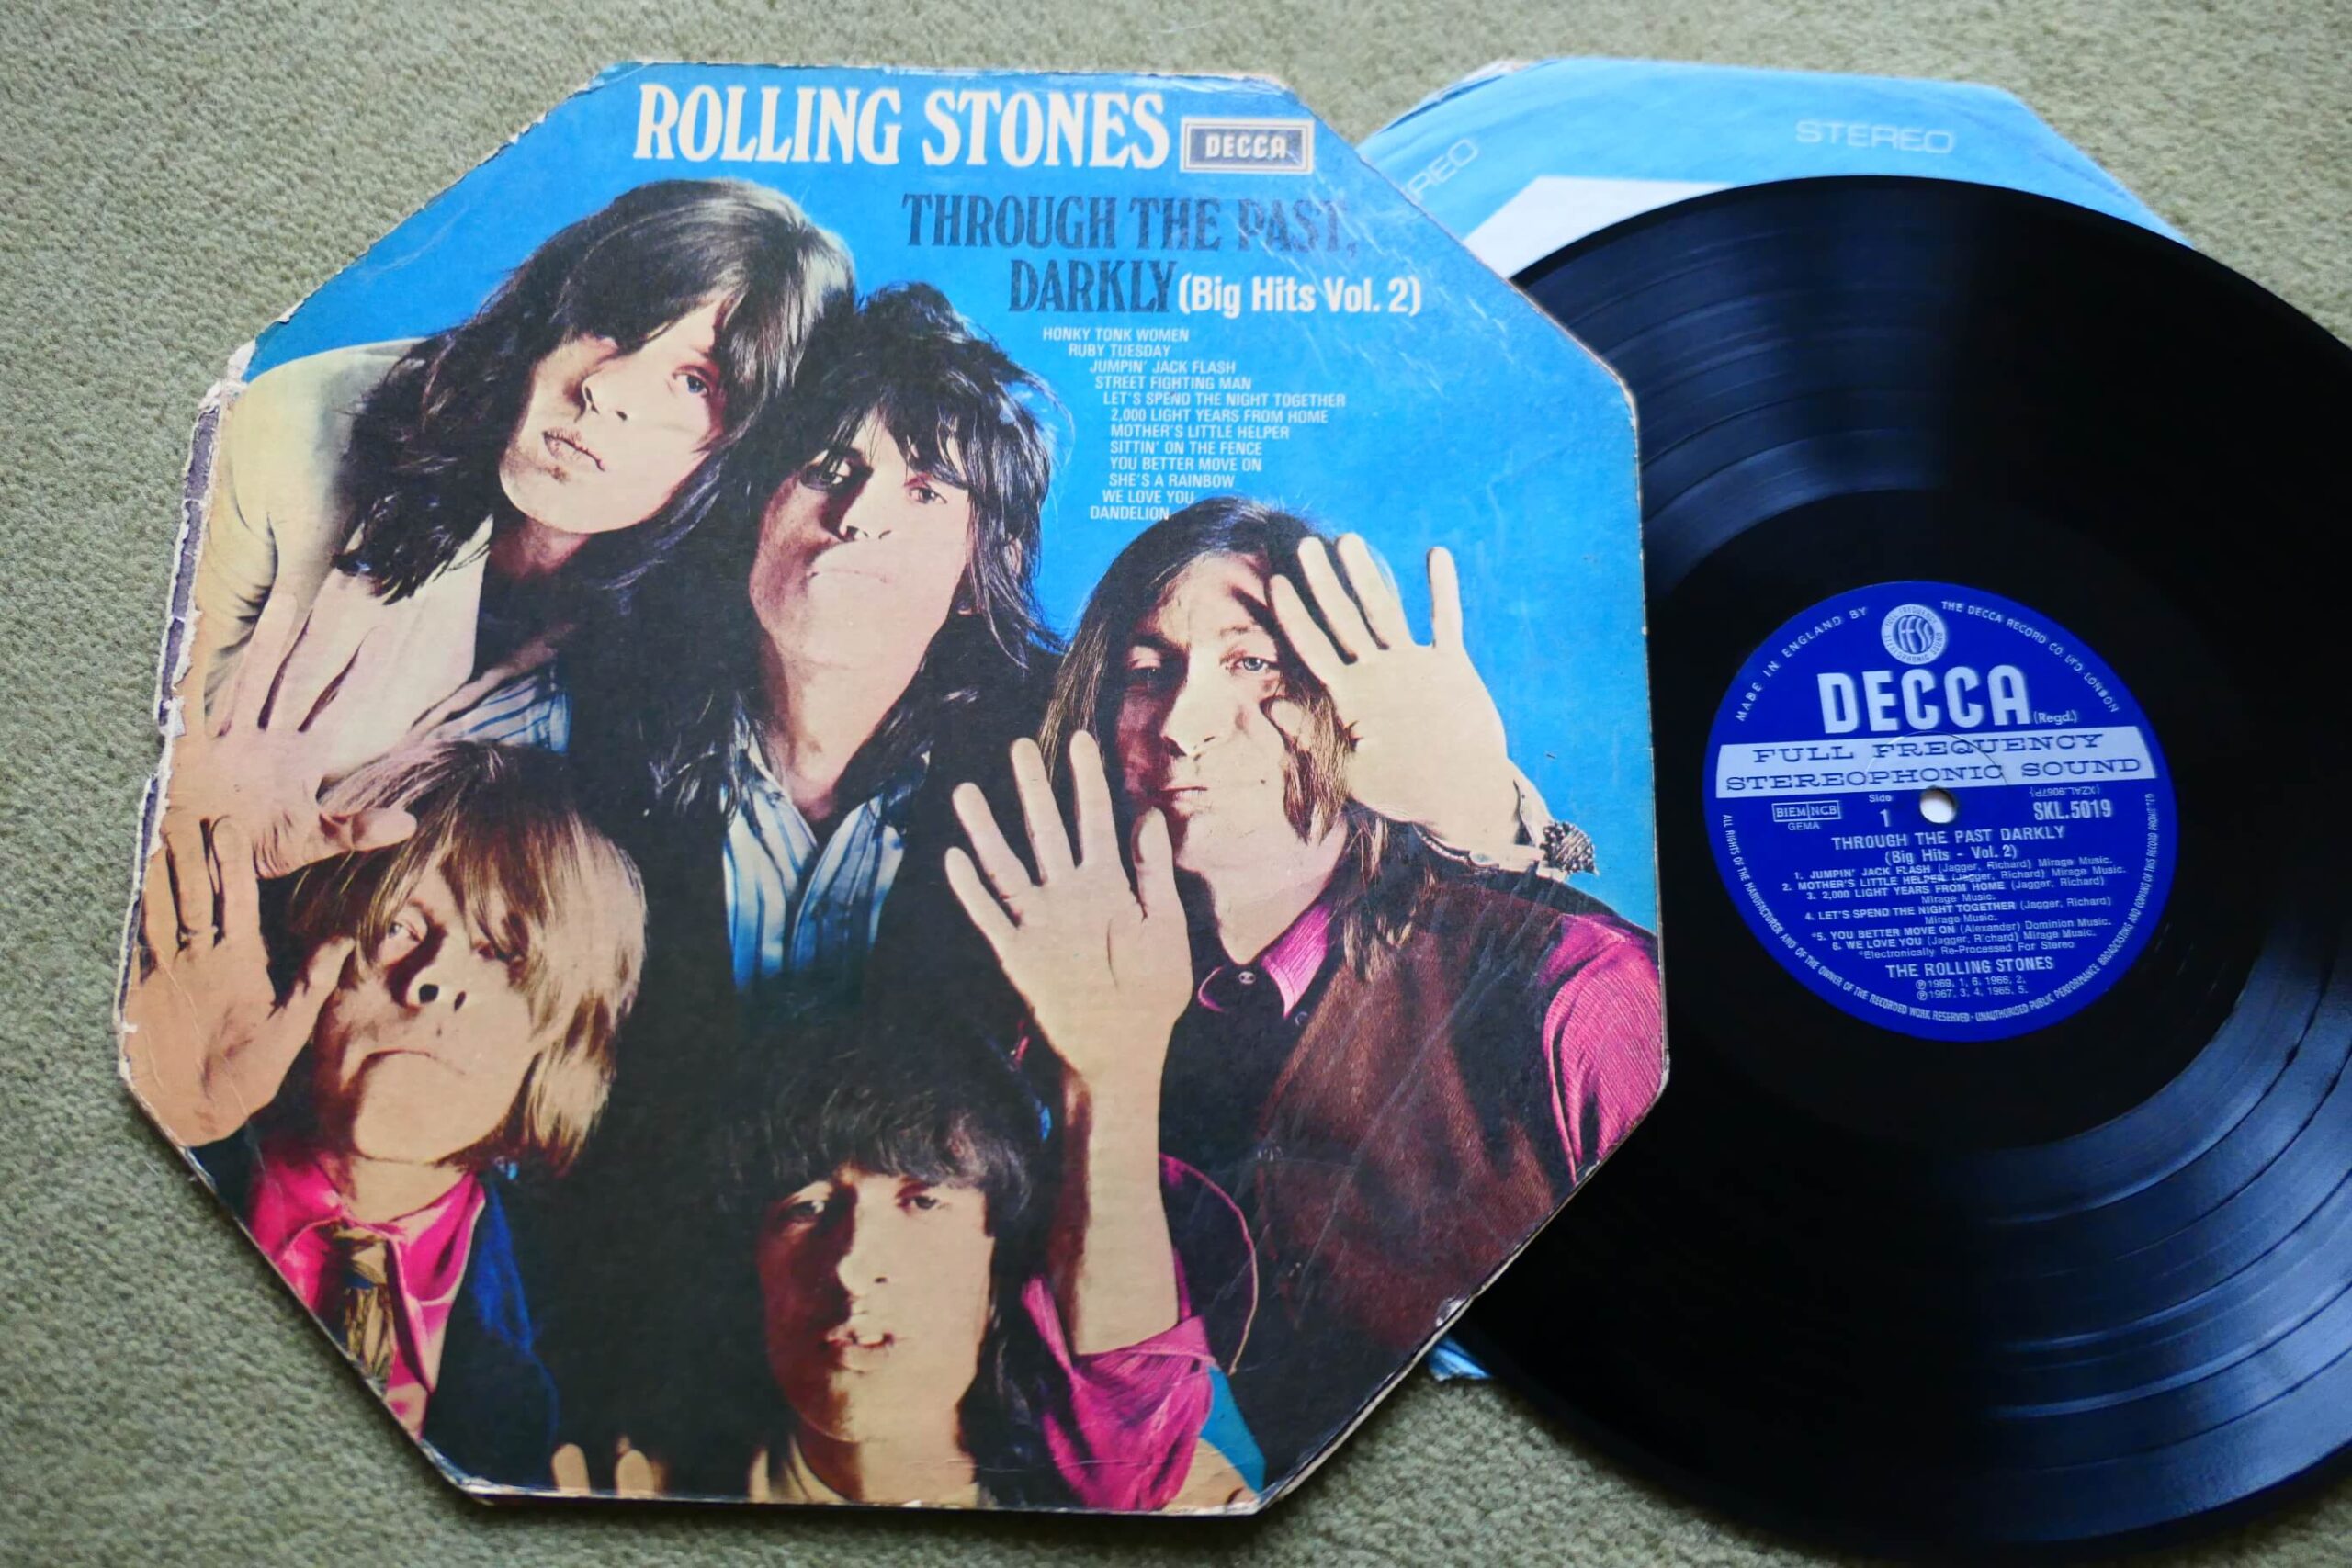 THE ROLLING STONES - THROUGH THE PAST DARKLY LP - EXC UK OCTAGONAL SLEEVE  STEREO DECCA